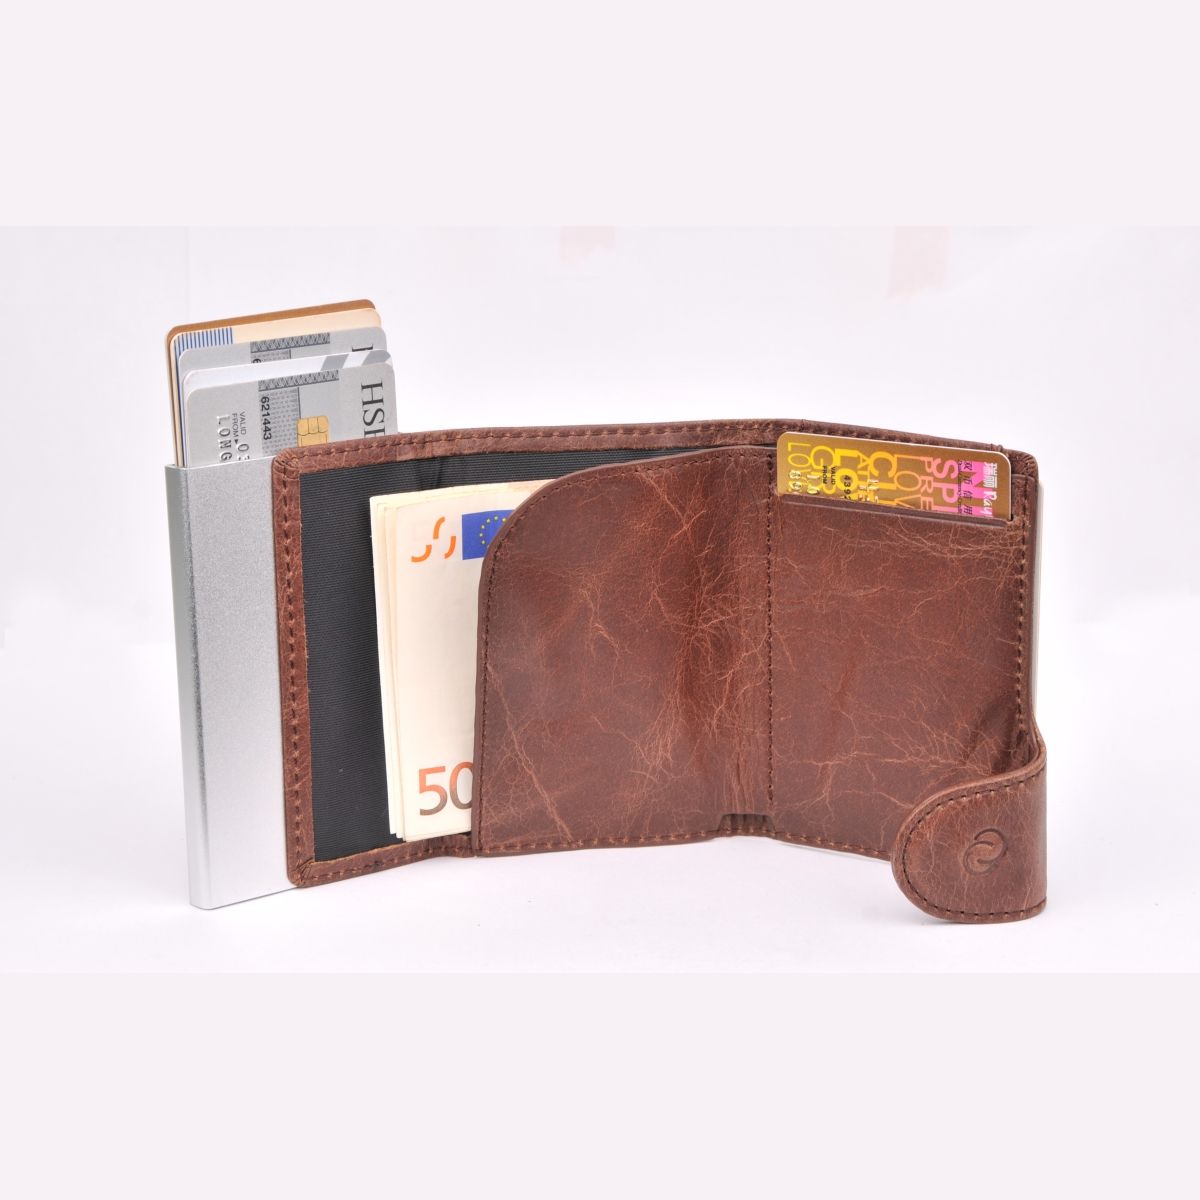 C-Secure Aluminum Card Holder with PU Leather - Dark Brown